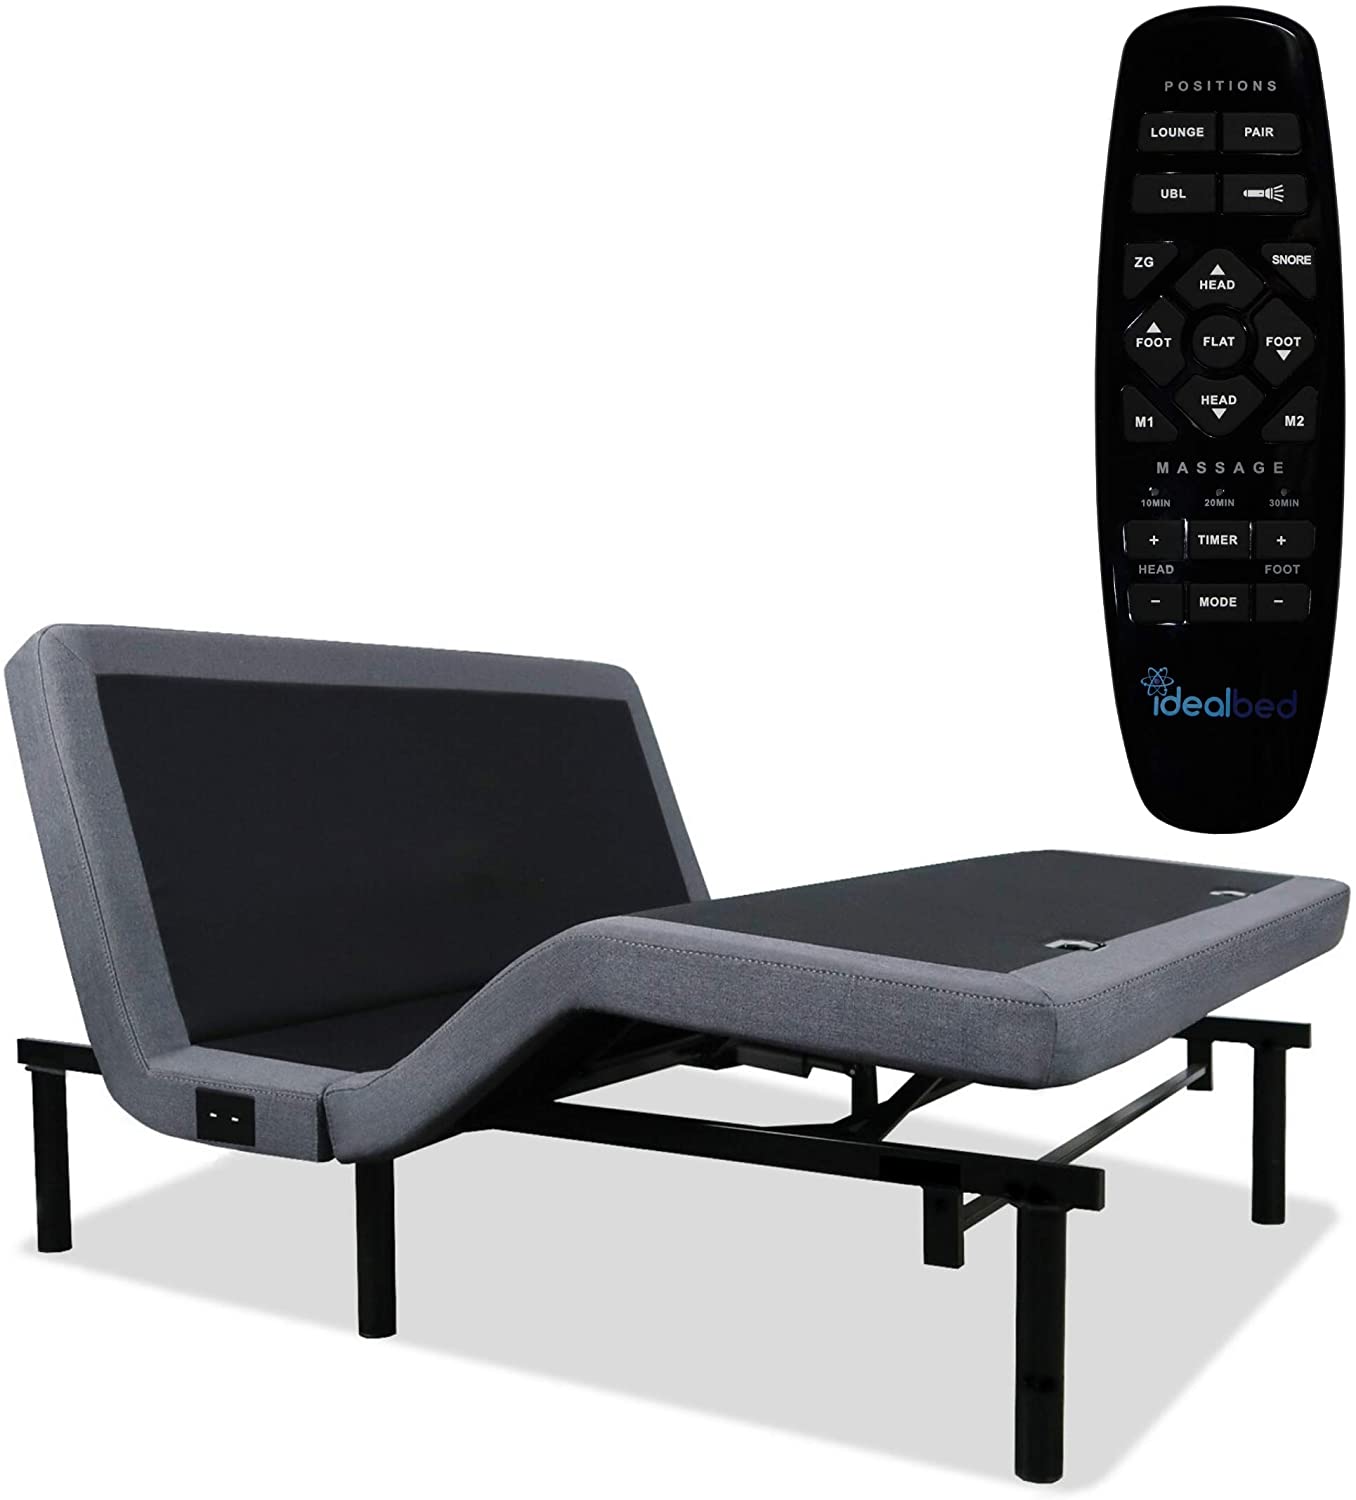 iDealBed 4i Wireless Remote Control TwinXL Adjustable Bed Frame